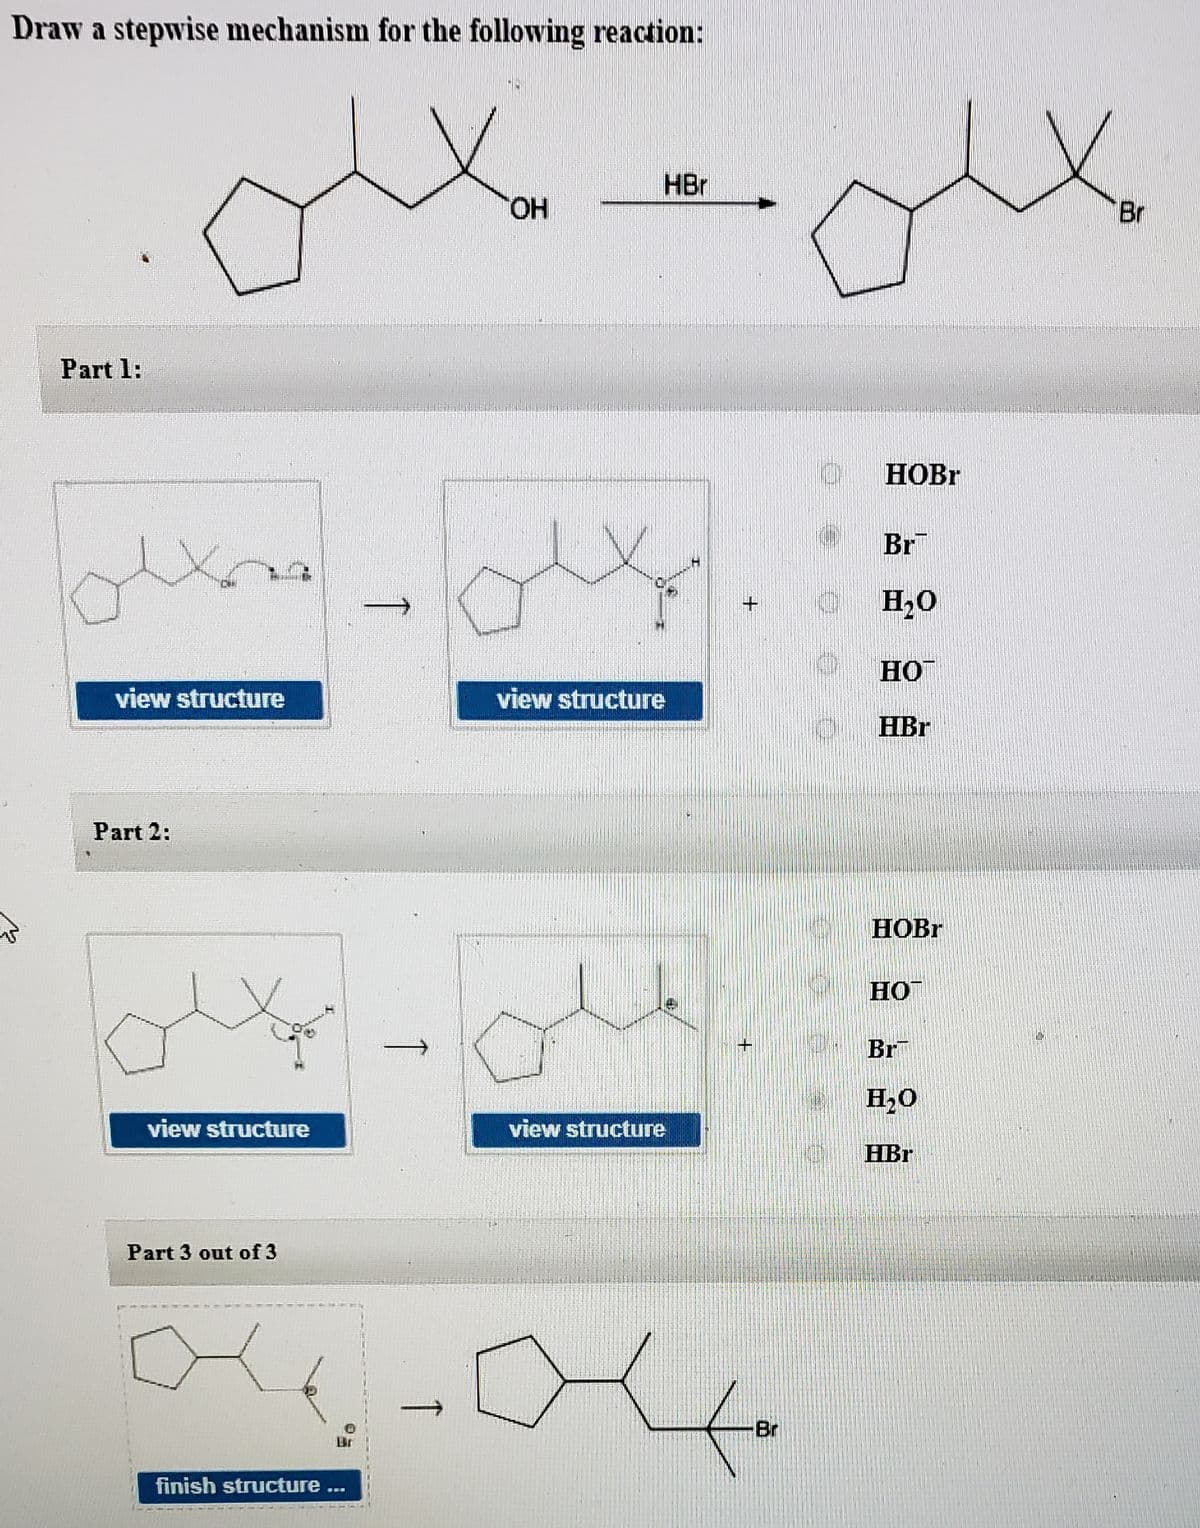 Draw a stepwise mechanism for the following reaction:
HBr
HO.
Br
Part 1:
HOBR
Br
+
H20
HO
view structure
view structure
HBr
Part 2:
HOBR
HO
Br
H2O
view structure
view structure
HBr
Part 3 out of 3
Br
Br
finish structure ...
↑
